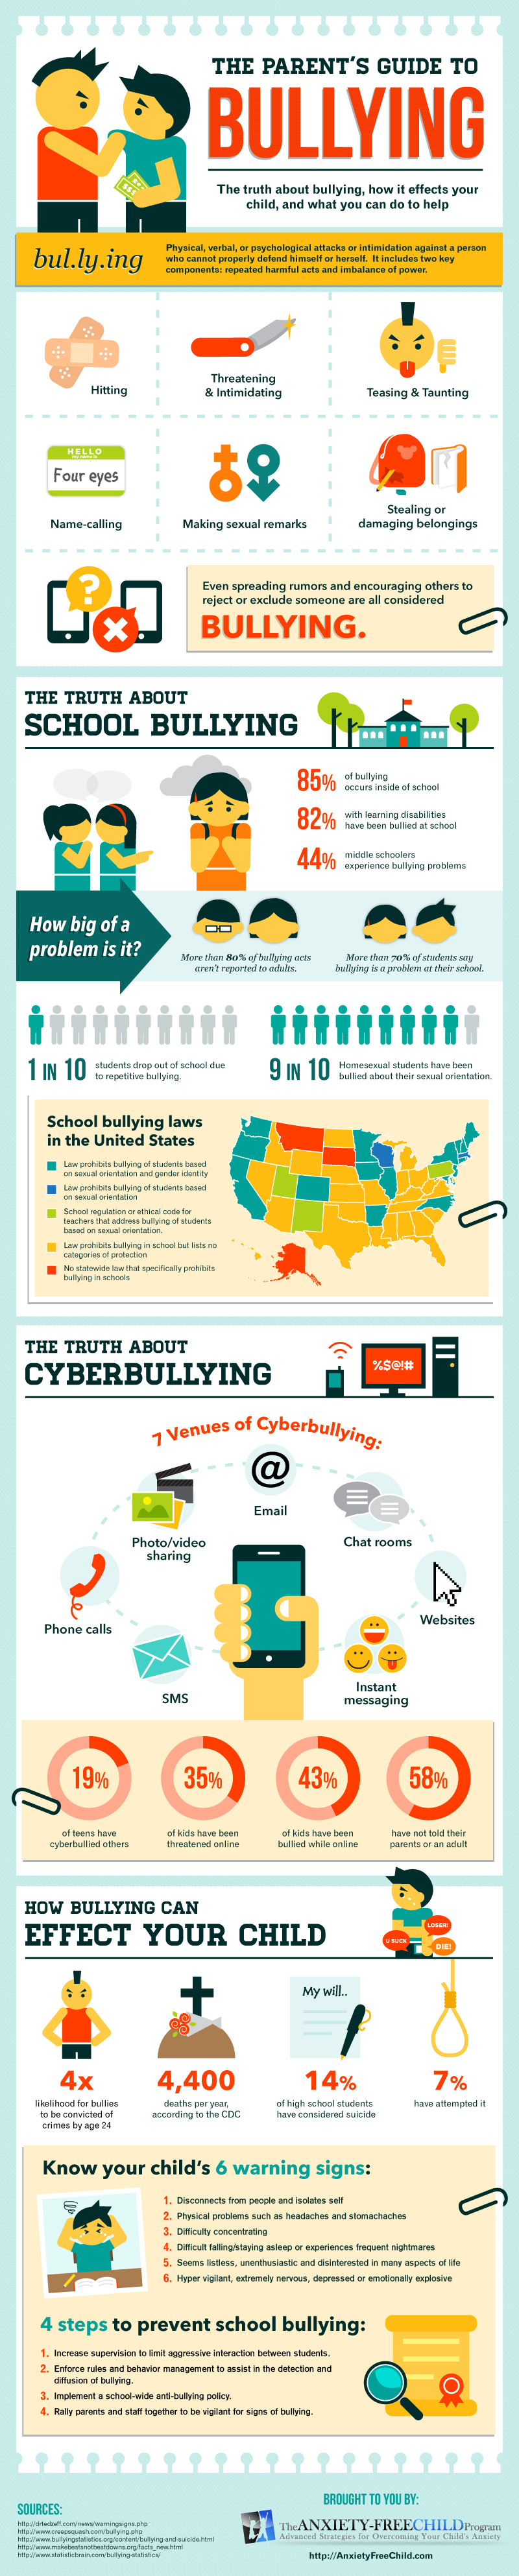 Facts About Bullying